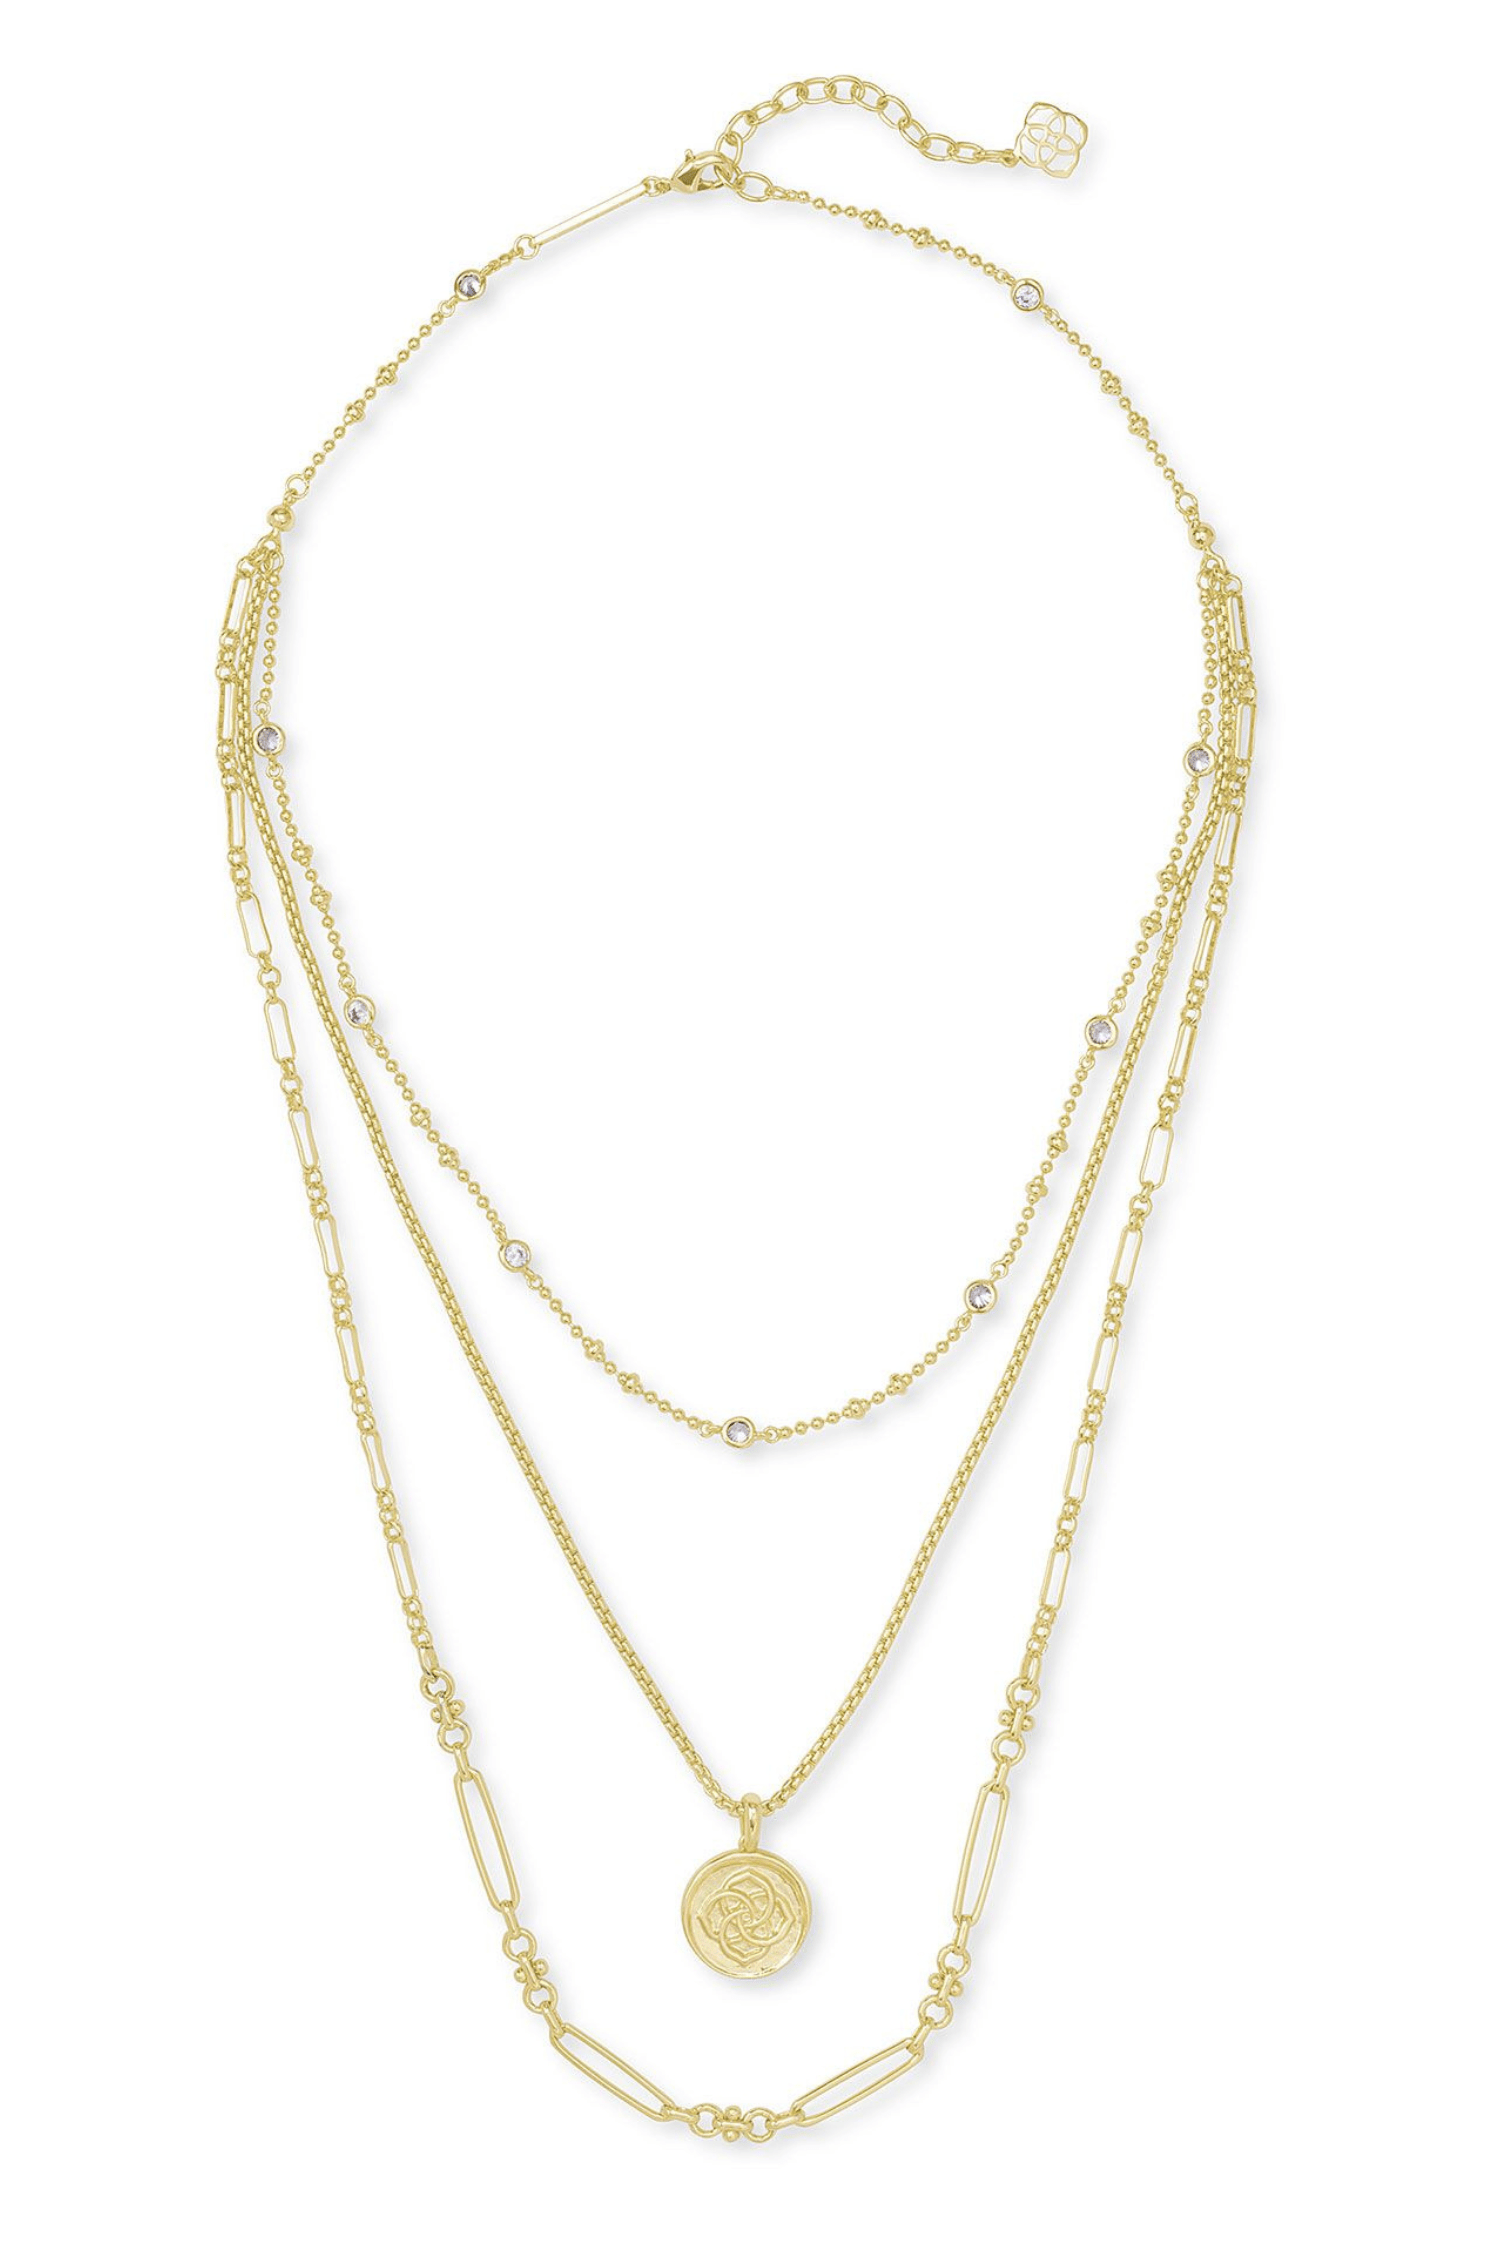 Kendra Scott - Go all in on layered chains. The latest trend, in Sterling  Silver & 18k Gold Vermeil. Shop now: https://bit.ly/2QuGDjo Elisa 18k Gold  Vermeil Pendant Necklace In Abalone: https://bit.ly/3AeyhRx Roll